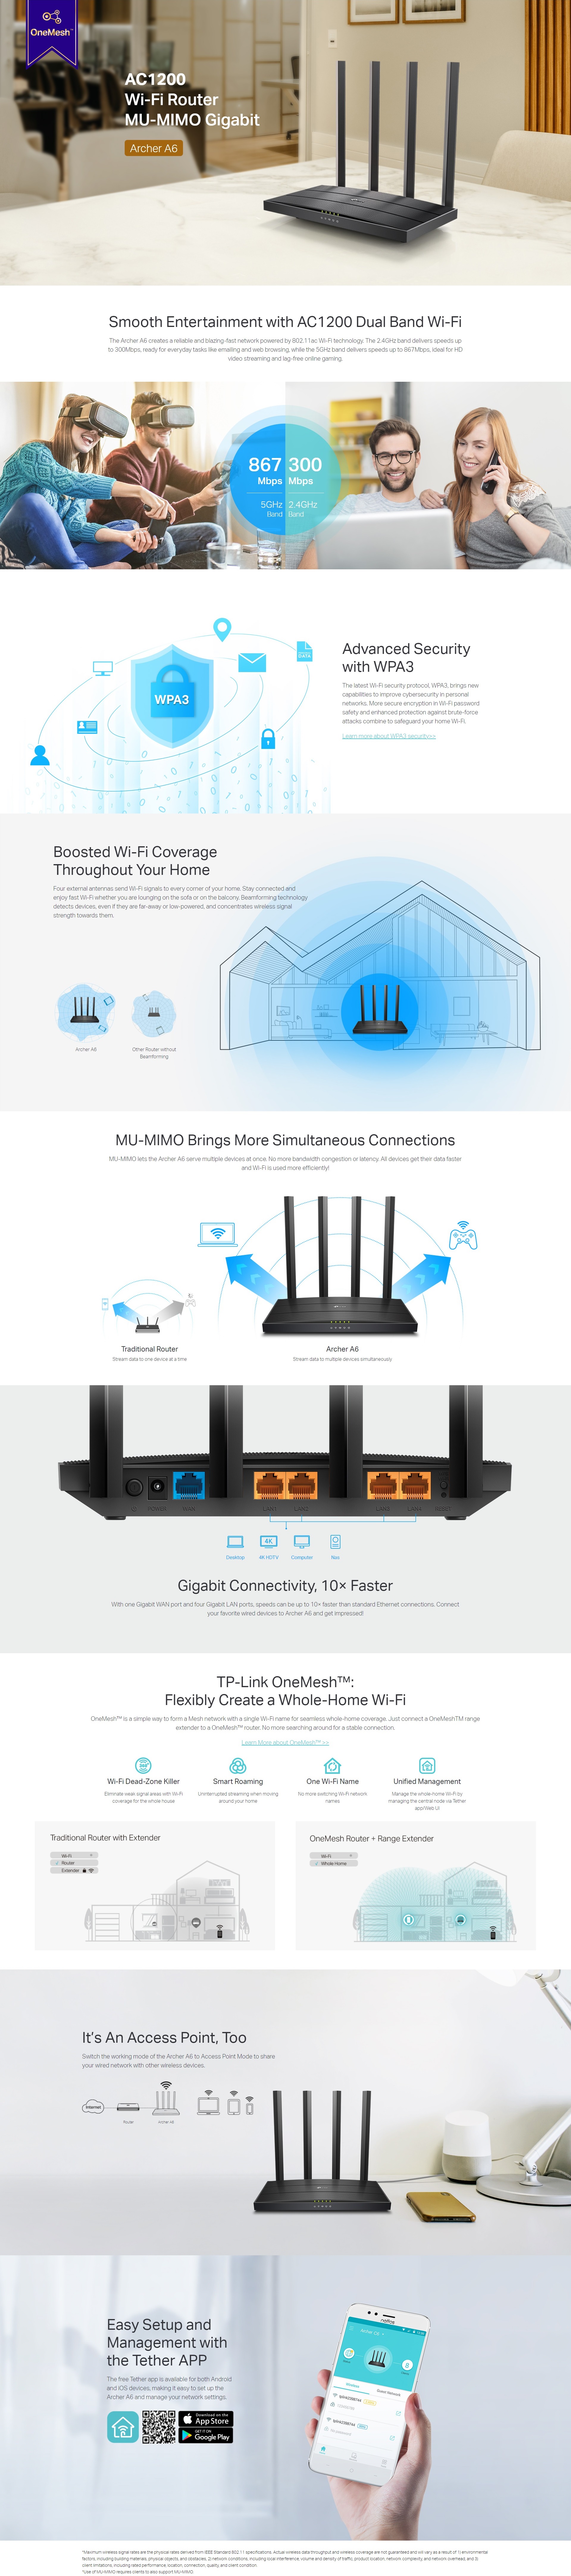 A large marketing image providing additional information about the product TP-Link Archer A6 - AC1200 Dual-Band Wi-Fi 5 Router - Additional alt info not provided